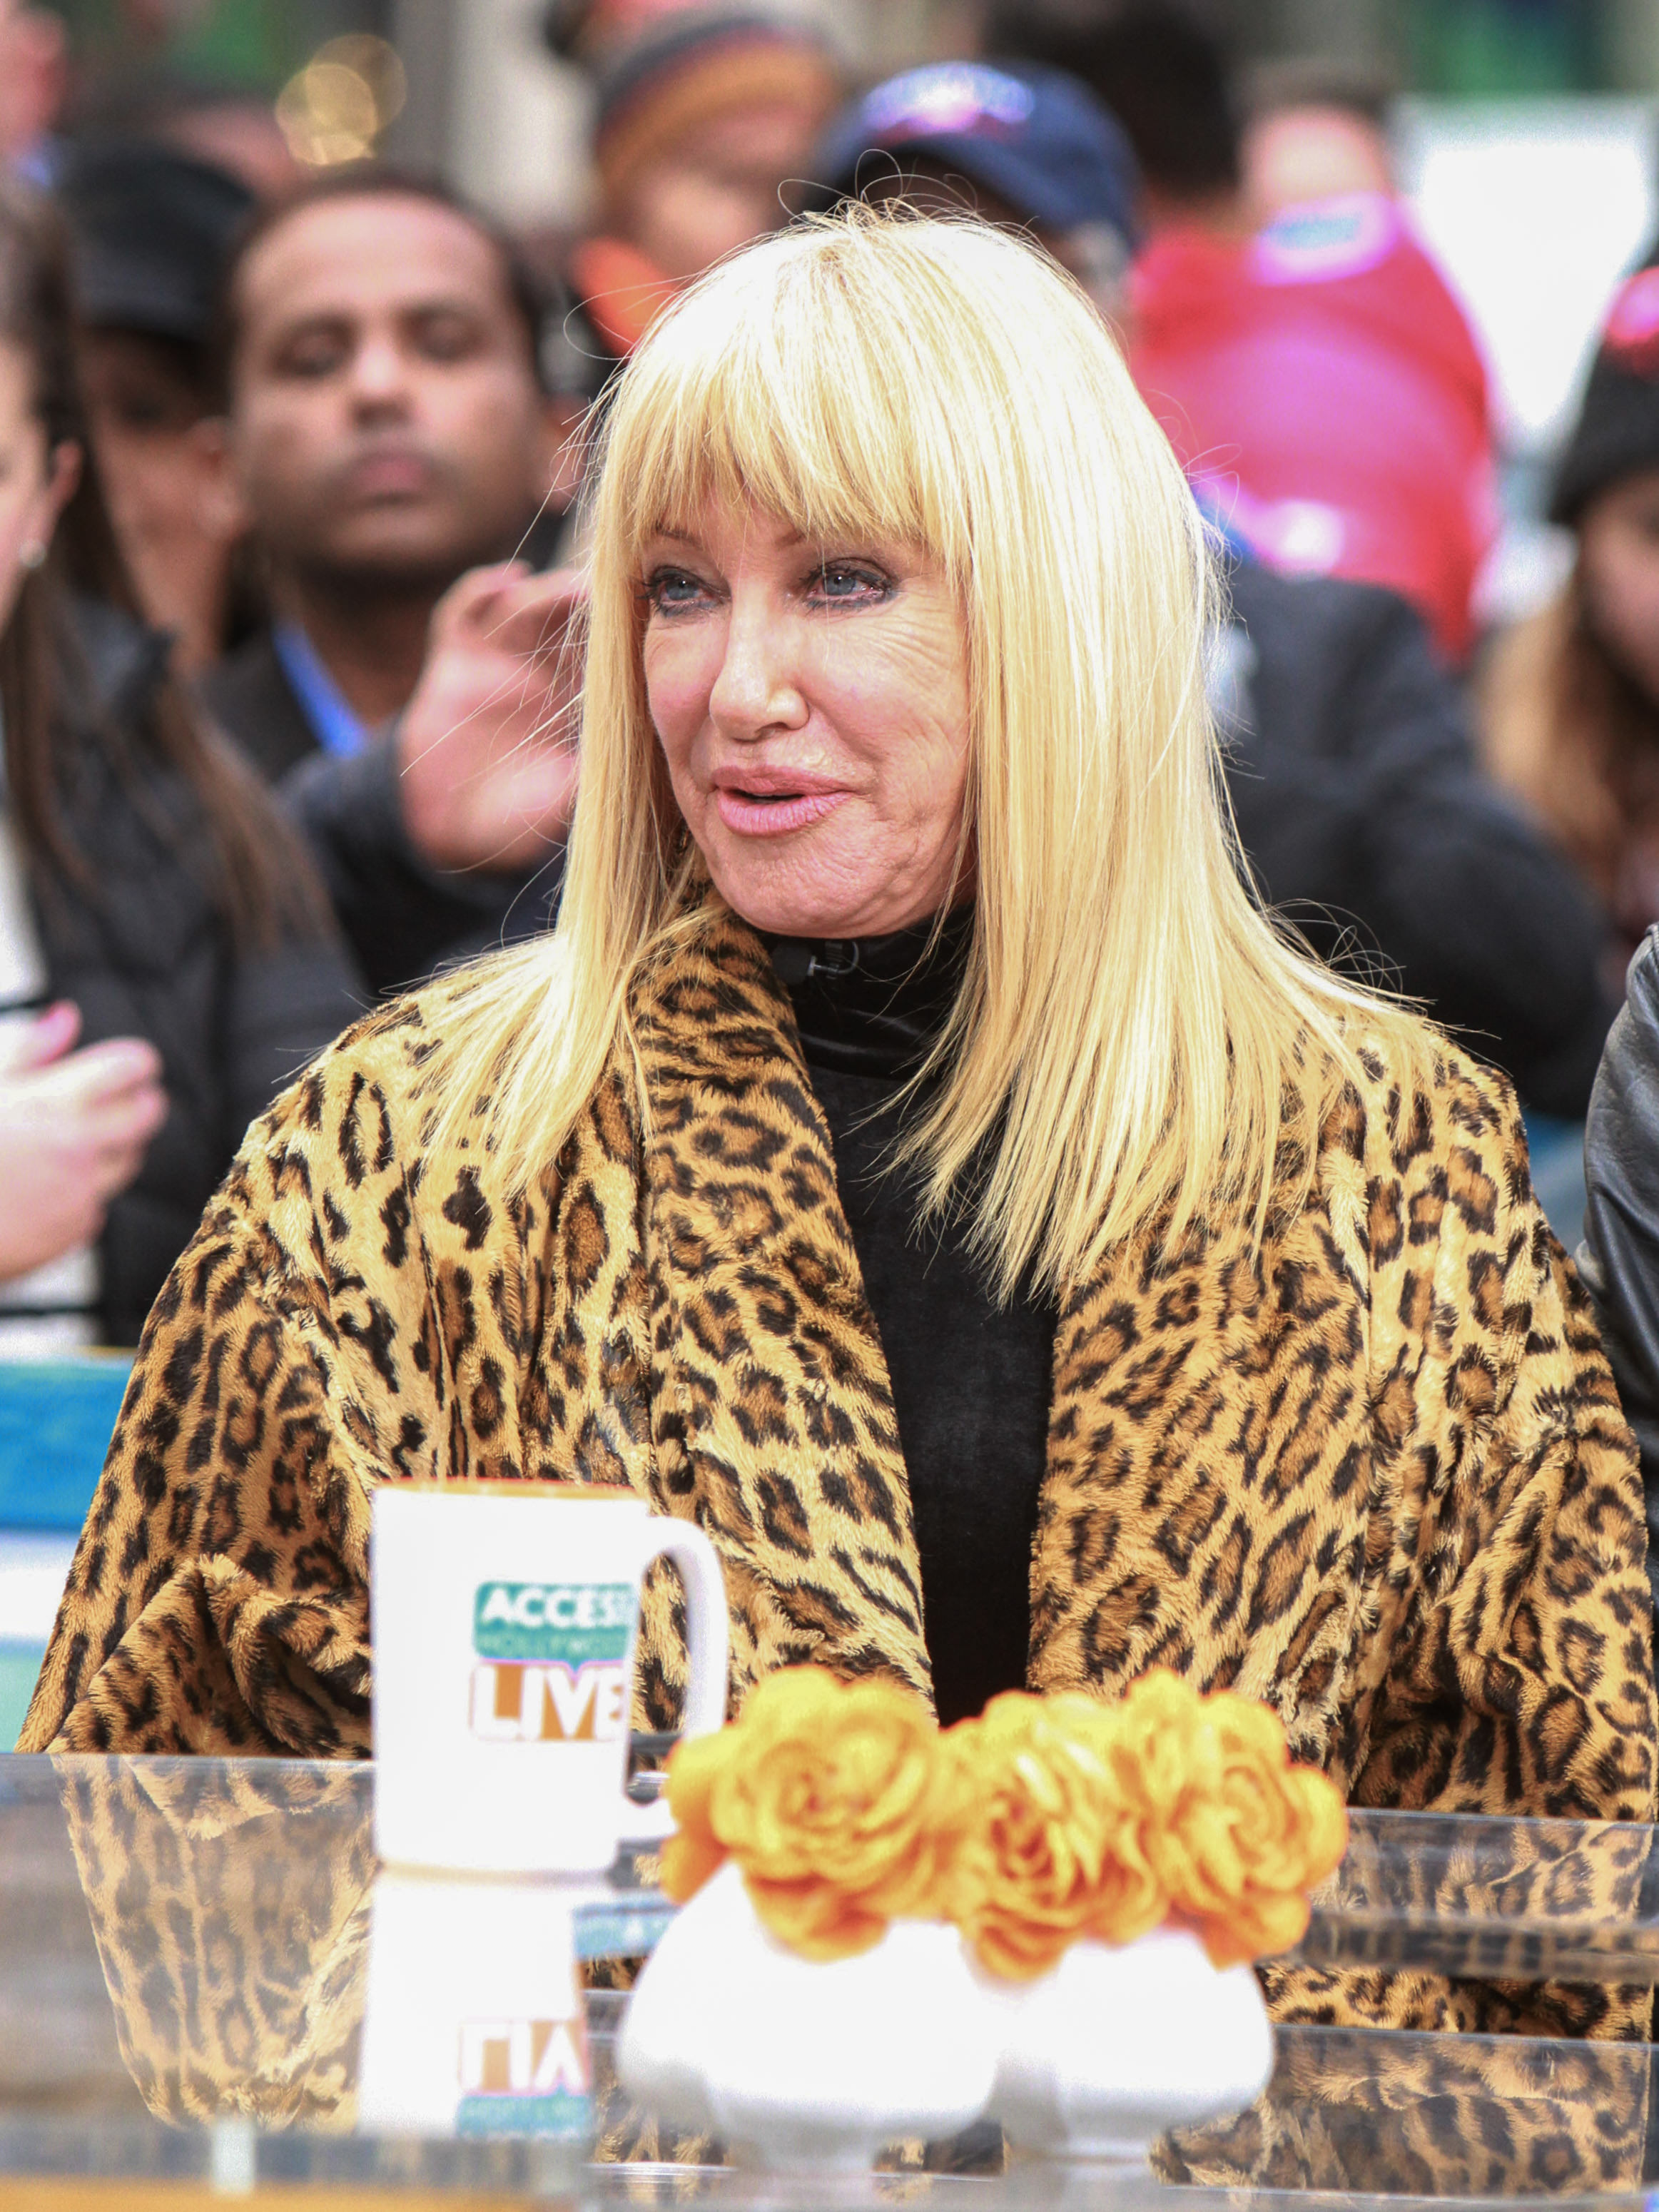 Suzanne Somers at 'Access Hollywood' on November 16, 2017 in New York City | Source: Getty Images